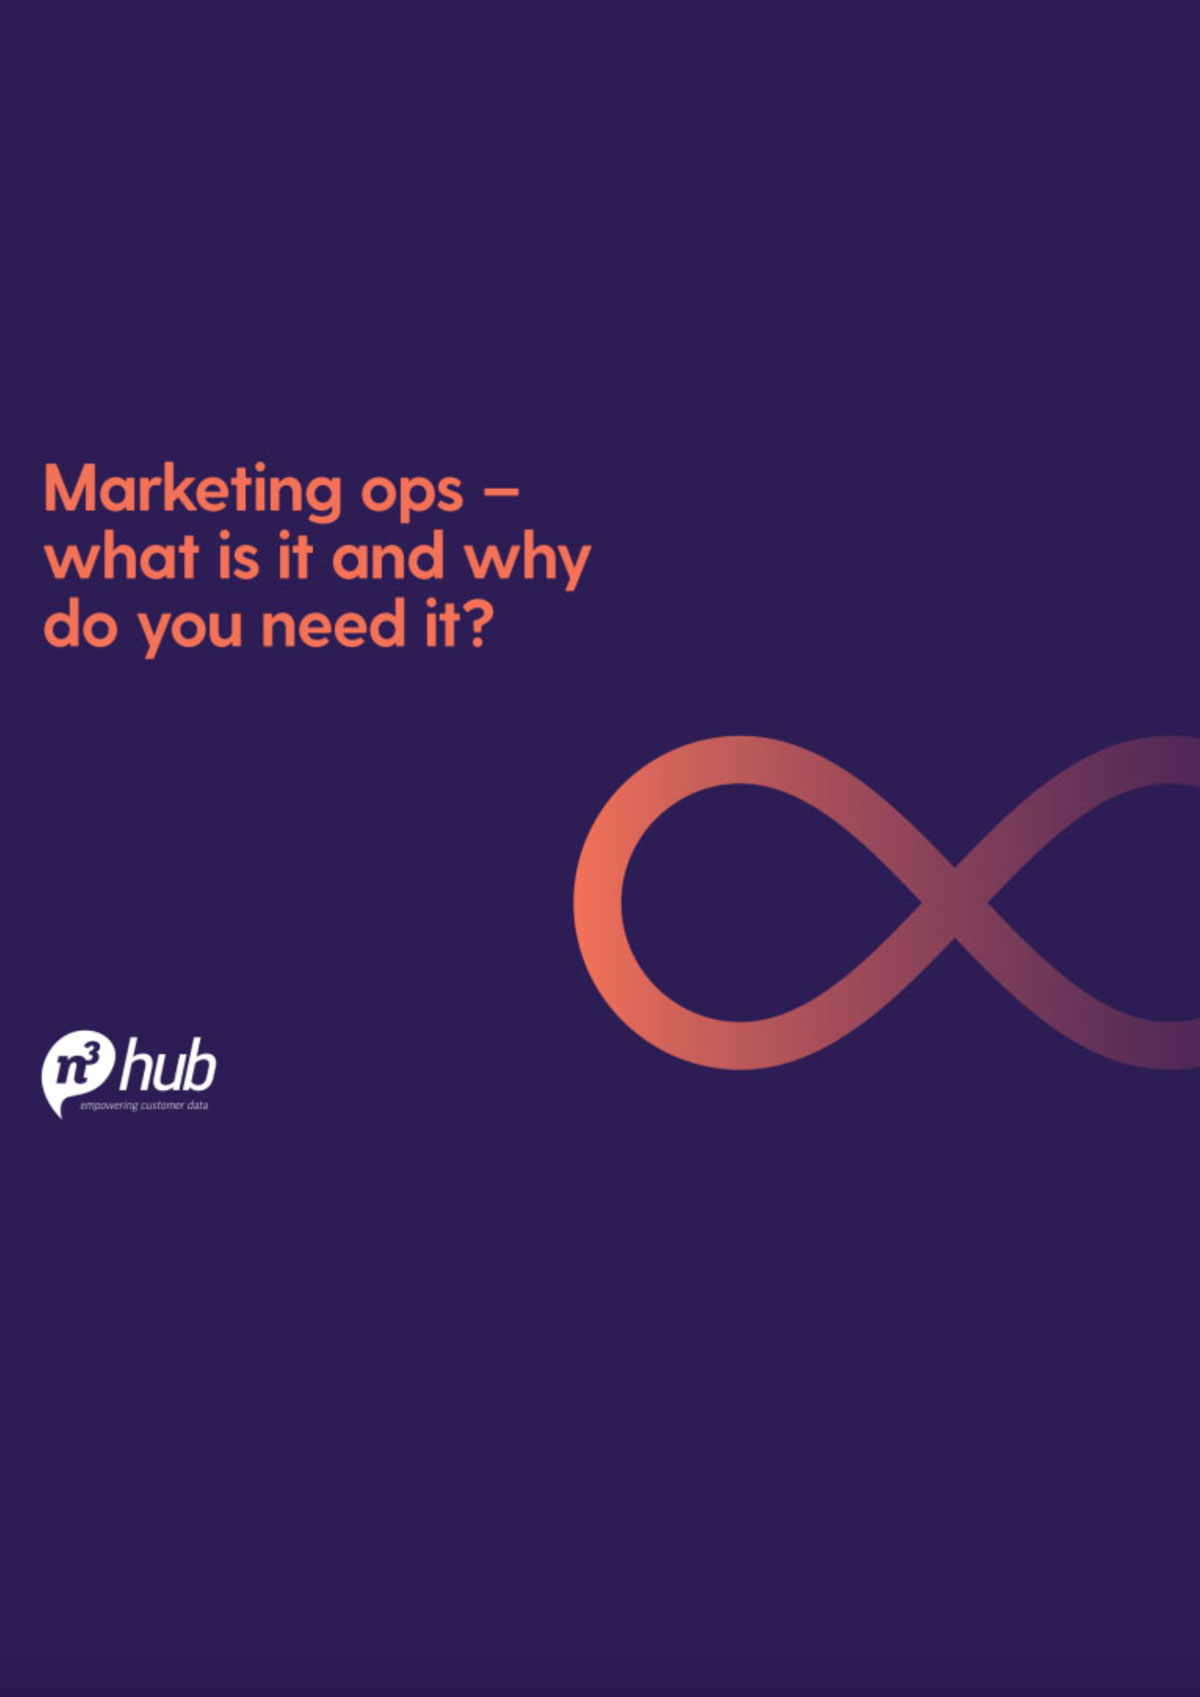 Marketing ops – what is it and why do you need it?